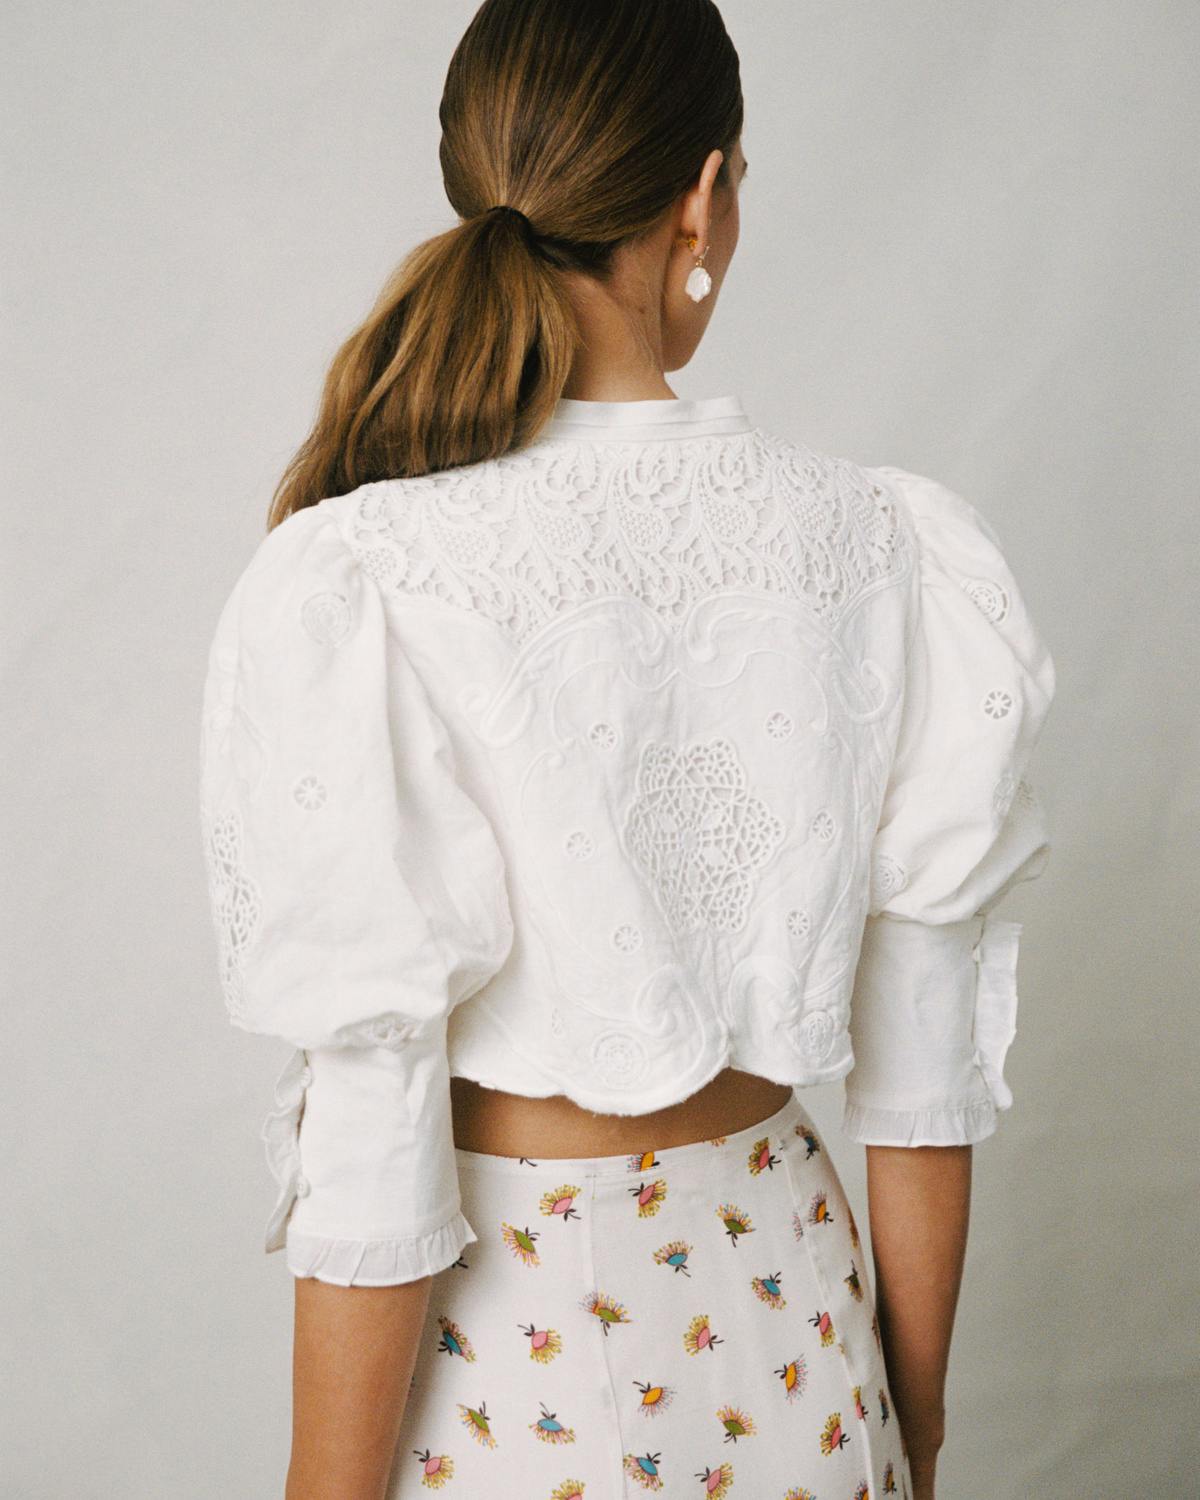 Linen Embroidery Jacket, White. Image #2